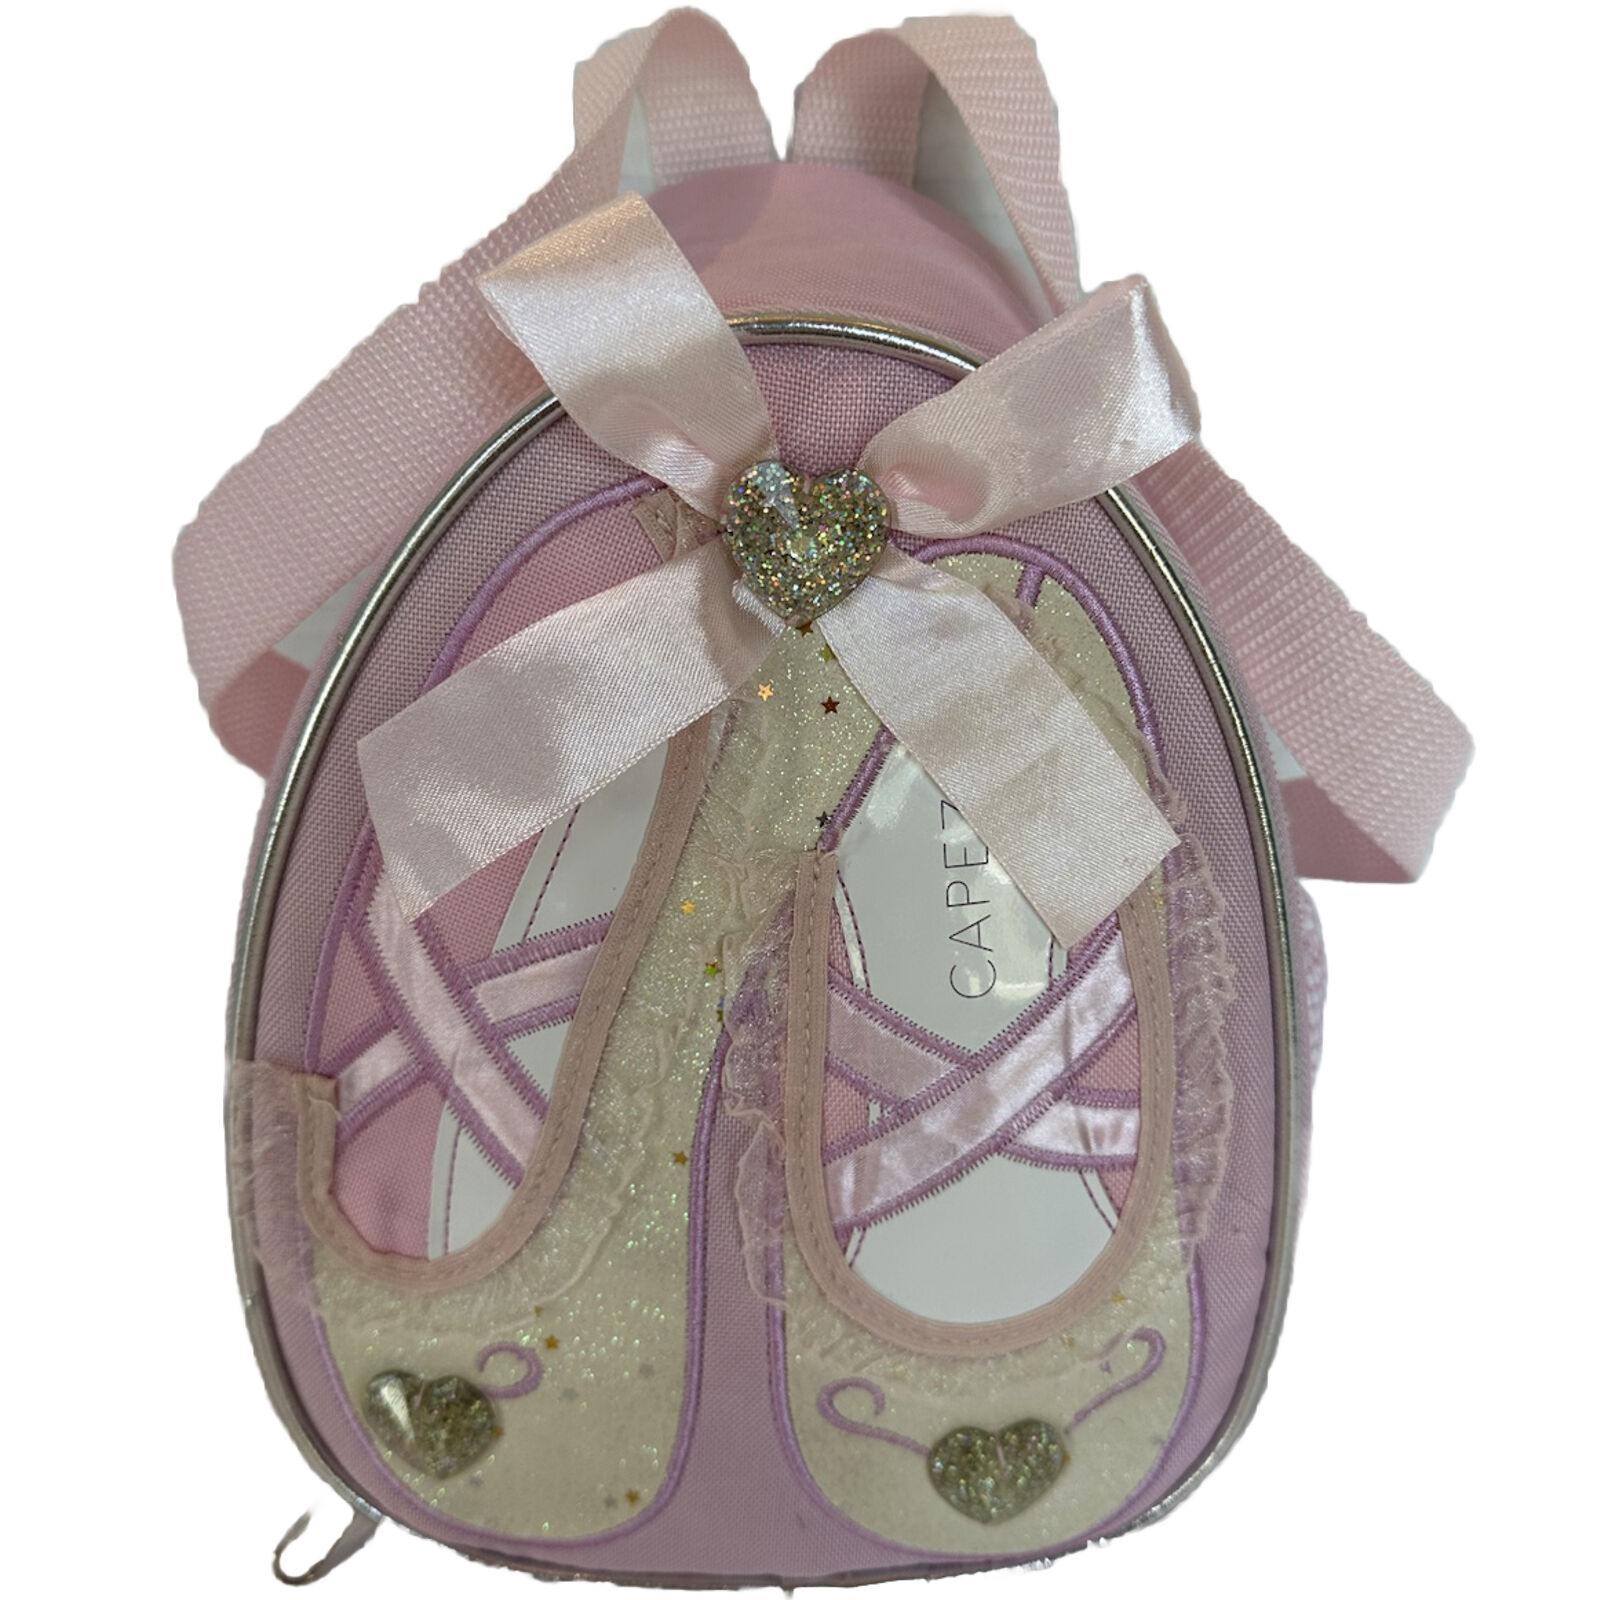 Capeziio Ballet Slippers Pink Backpack Lunch Bag EUC Balletcore Glitter Lace